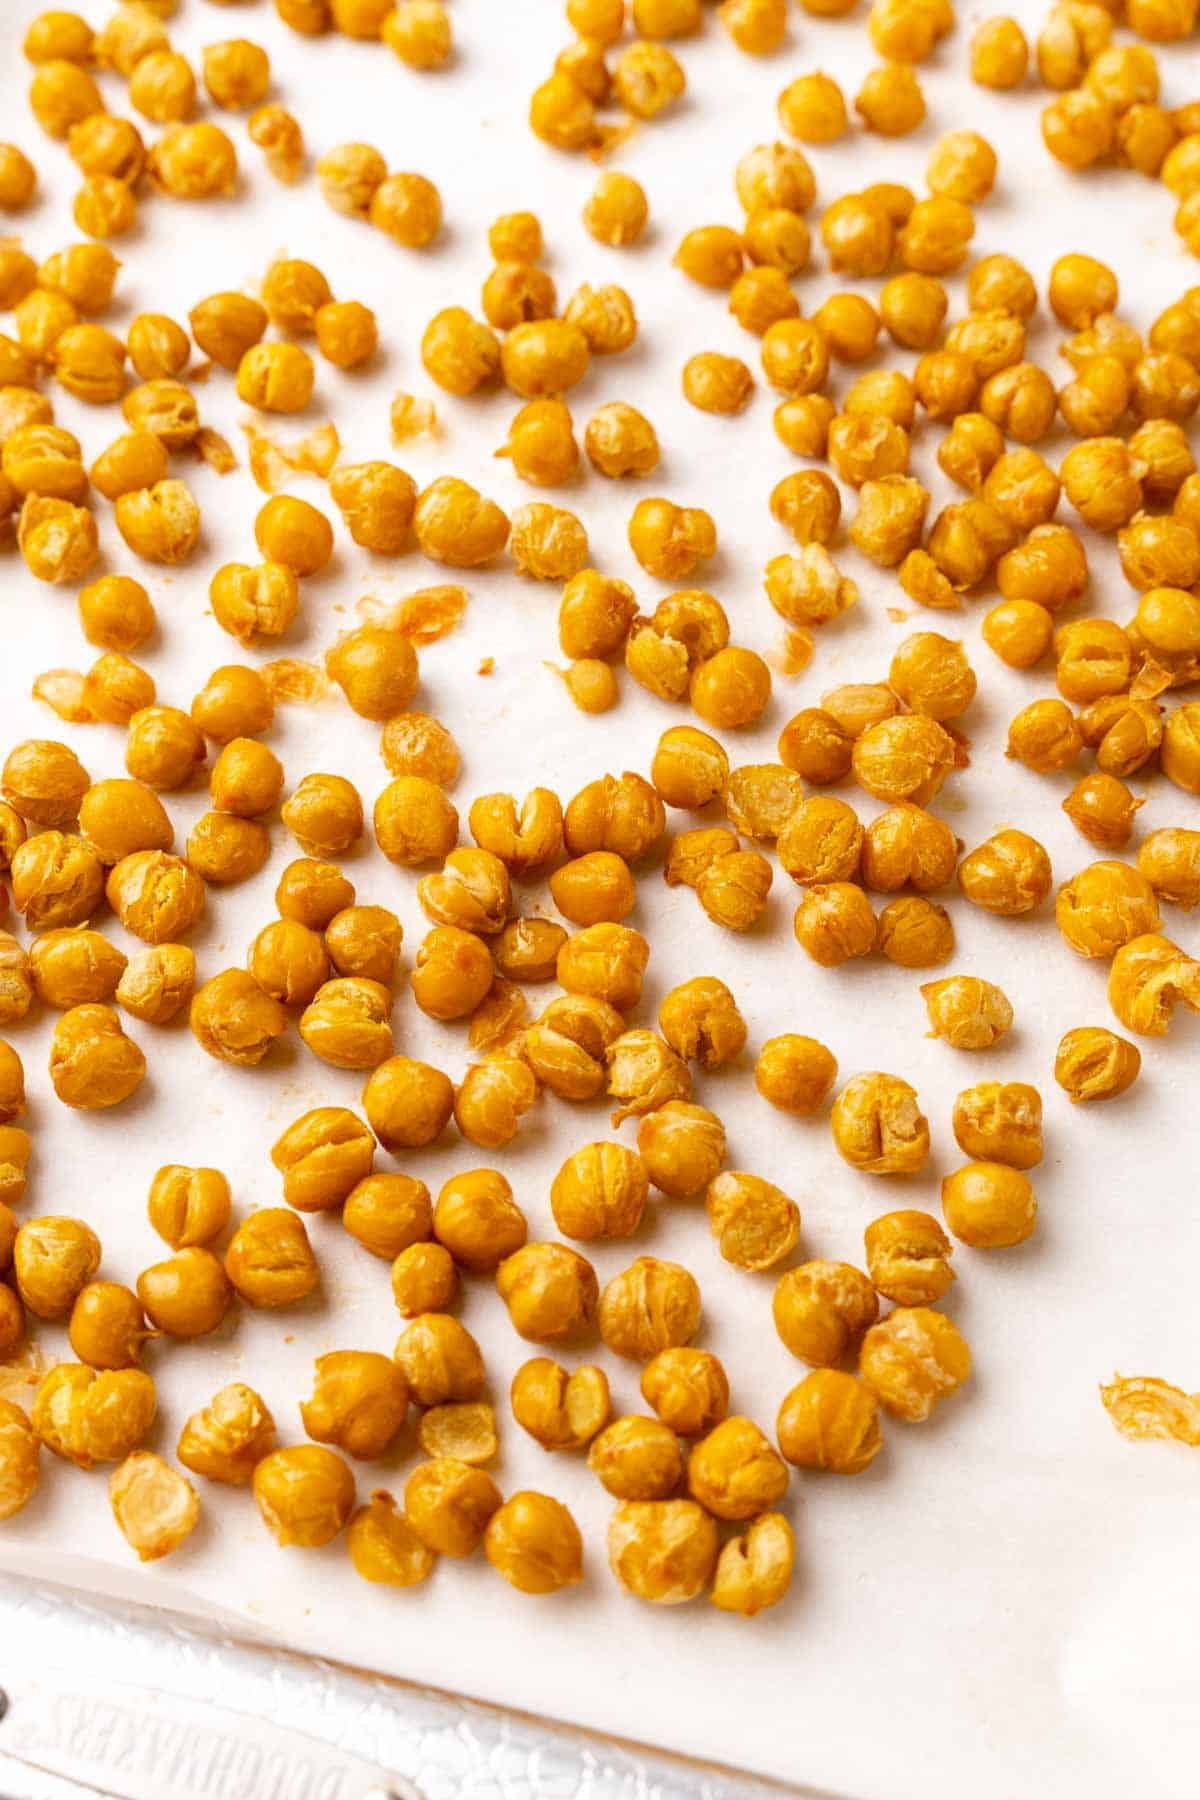 Closeup of roasted chickpeas on a baking sheet lined with parchment paper